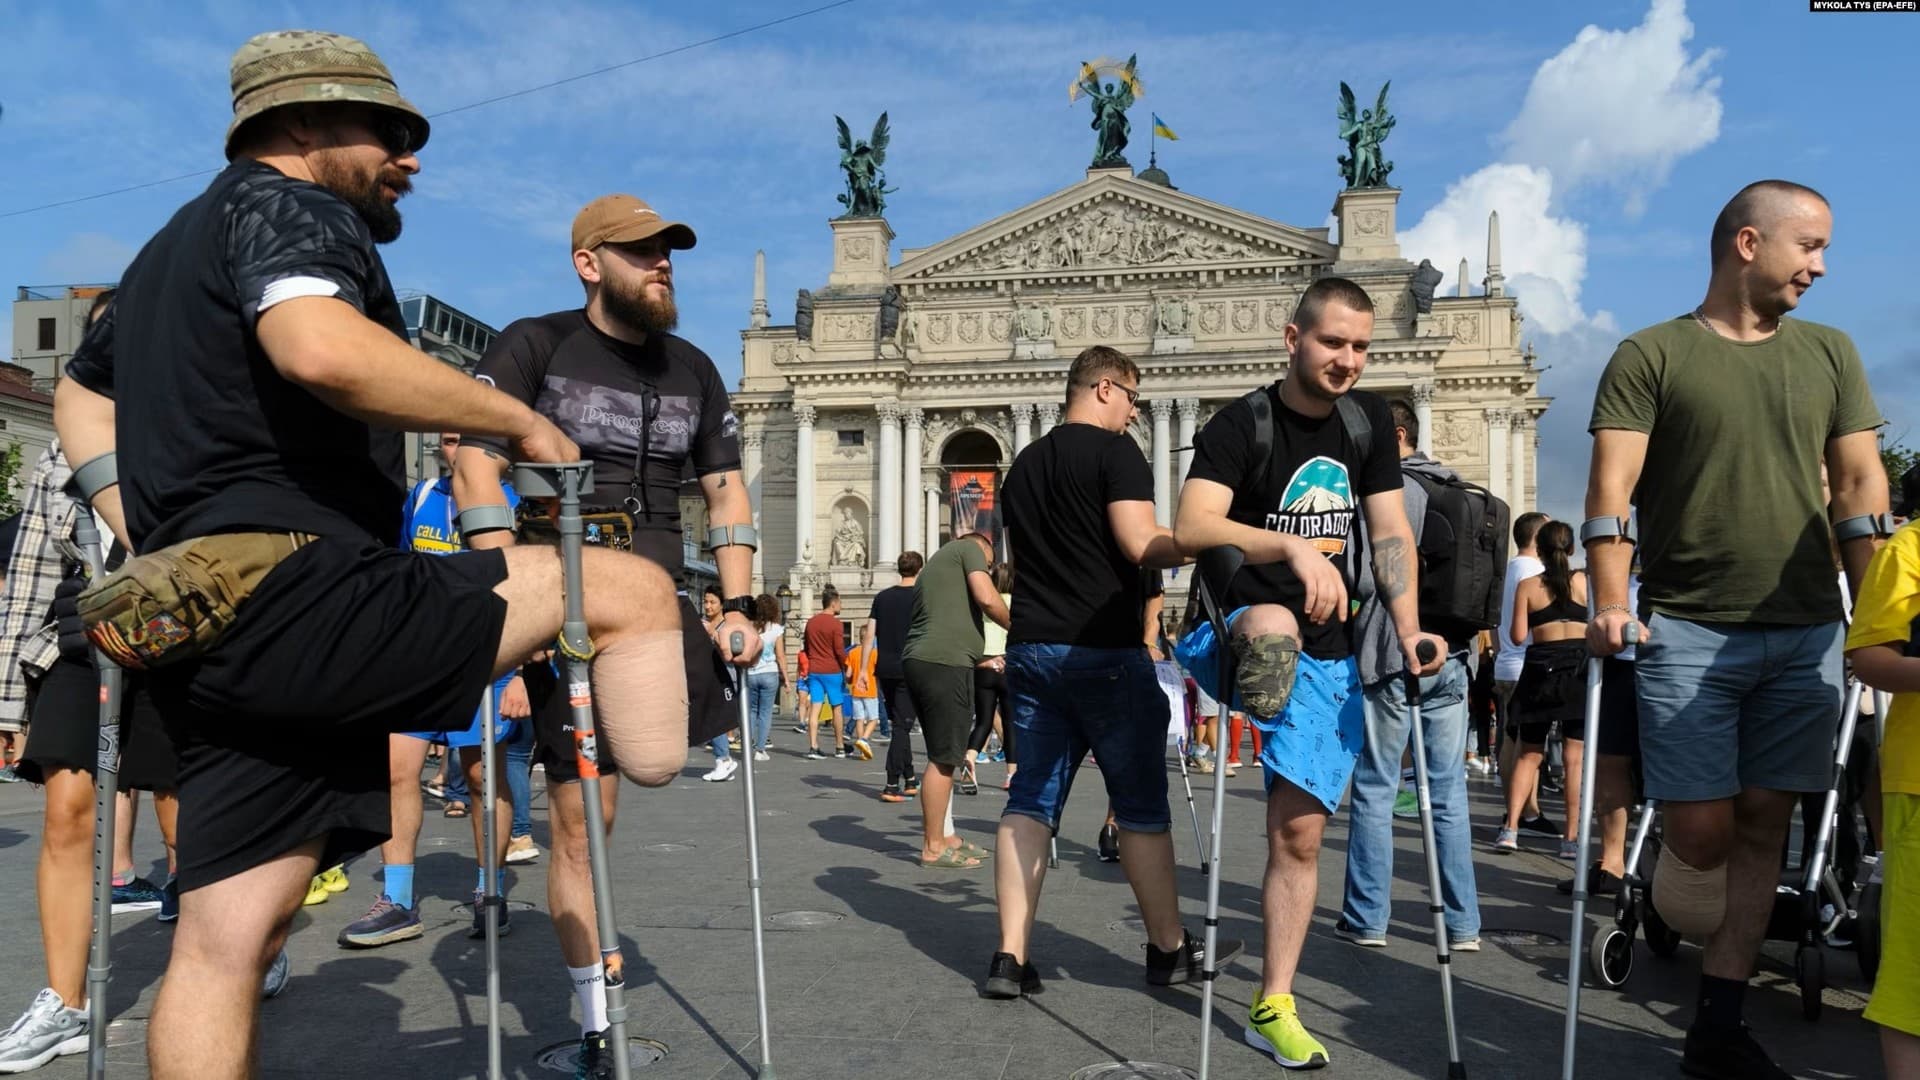 Ukrainian soldiers and civilians who have lost limbs prepare to take part in a charity half-marathon in downtown Lviv